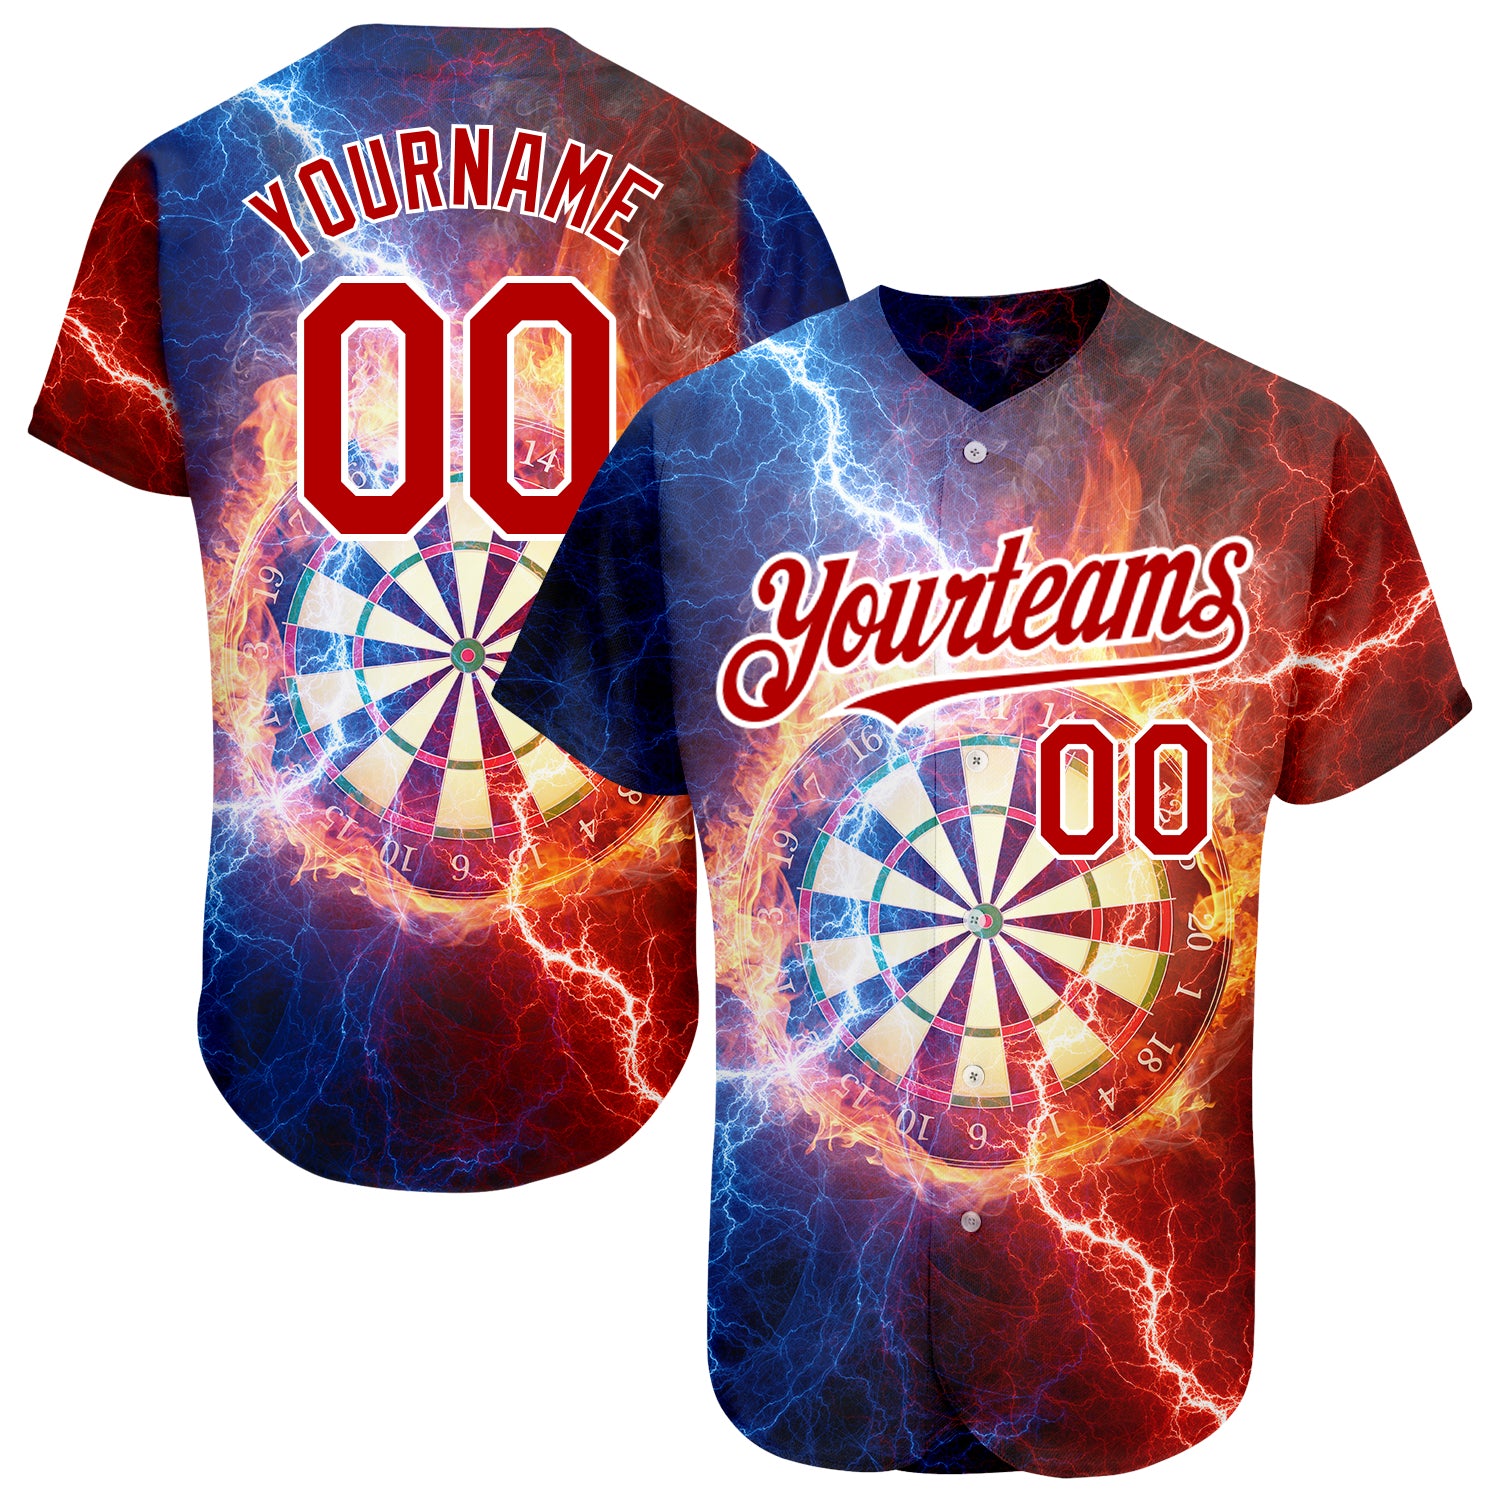 FIITG Custom Basketball Suit Jersey Red Gold-Black Flame Round Neck Sublimation